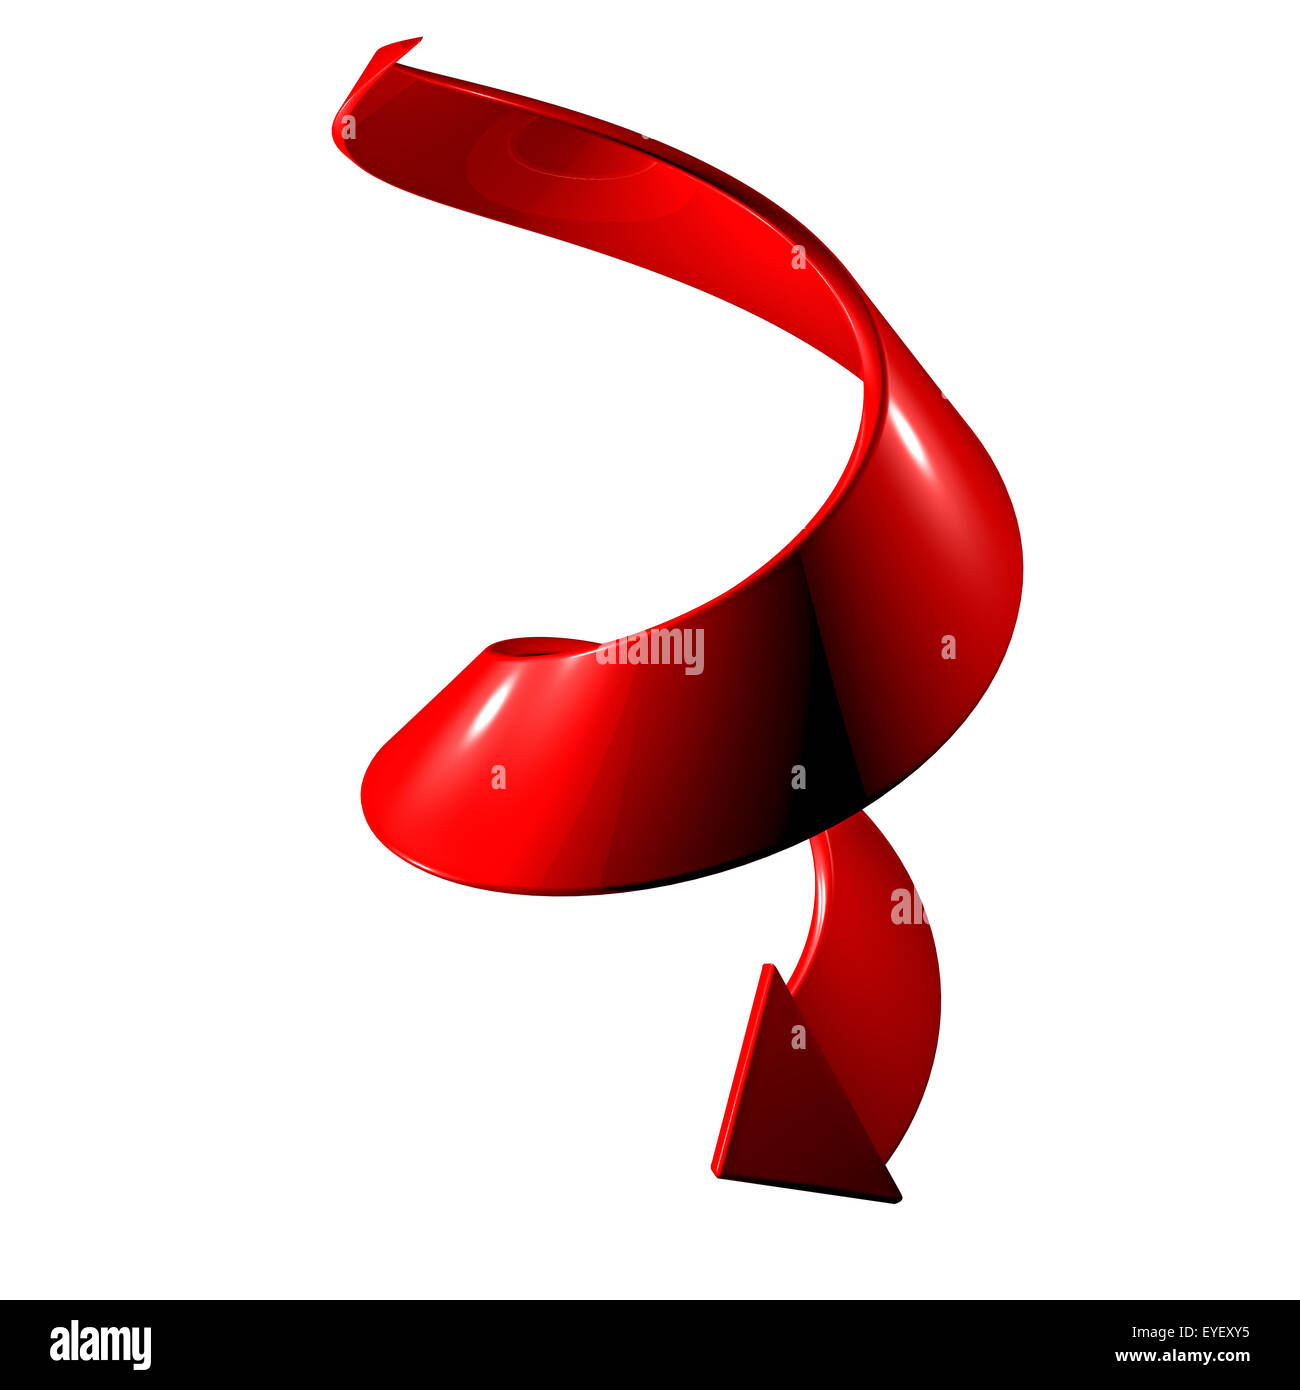 Red spiral arrow 3D. Stock Photo